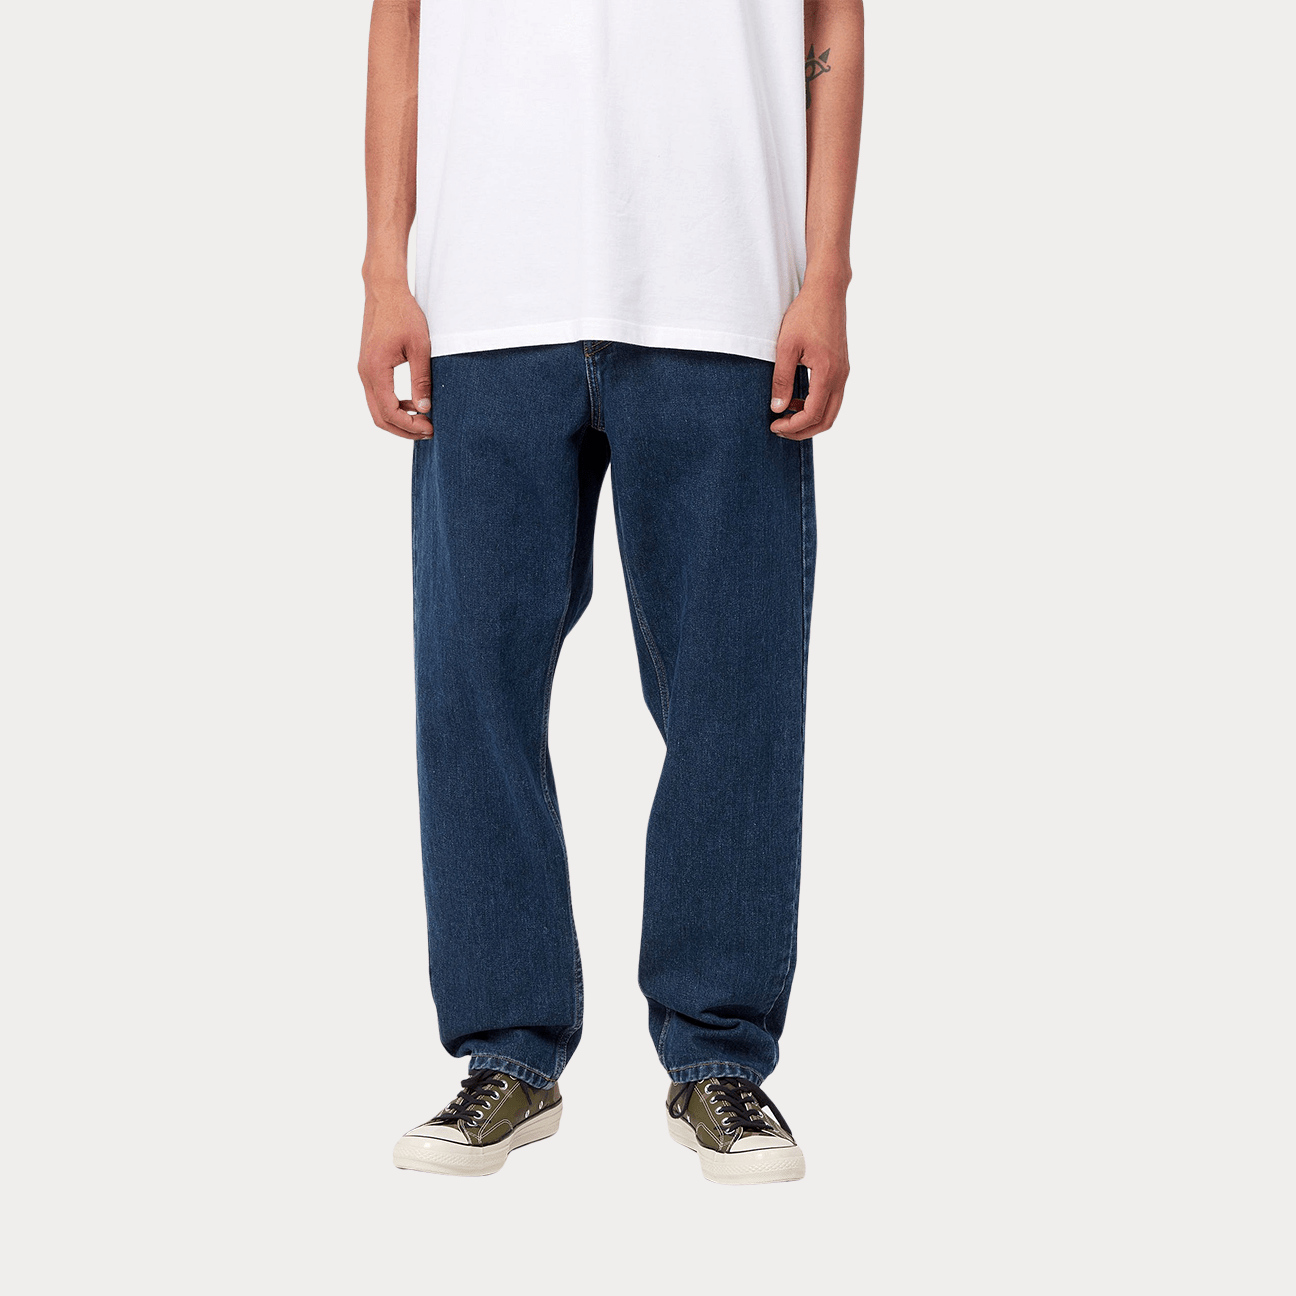 CARHARTT Jeans Newel Blue Stone washed